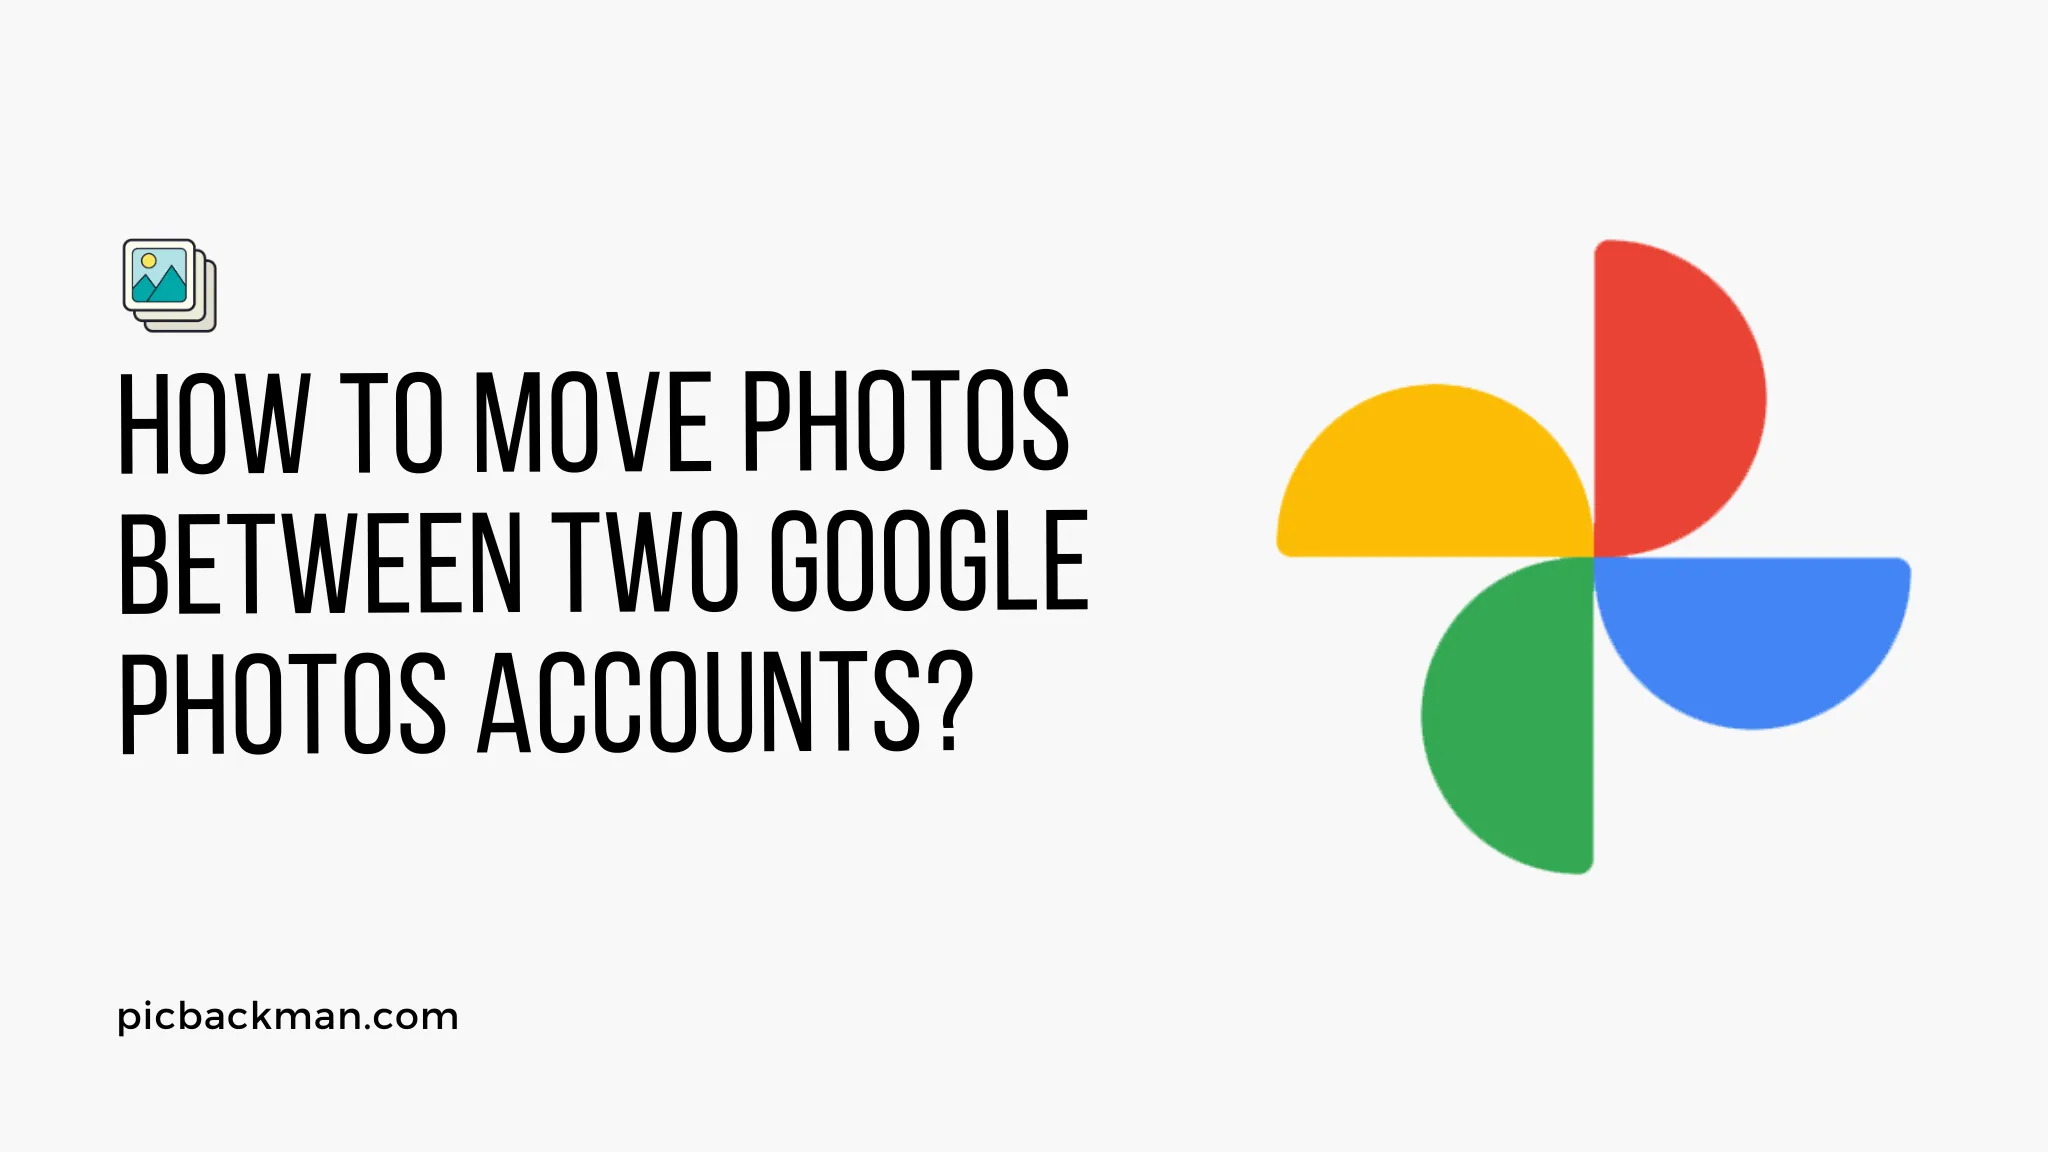 How to Move Photos between Two Google Photos Accounts?